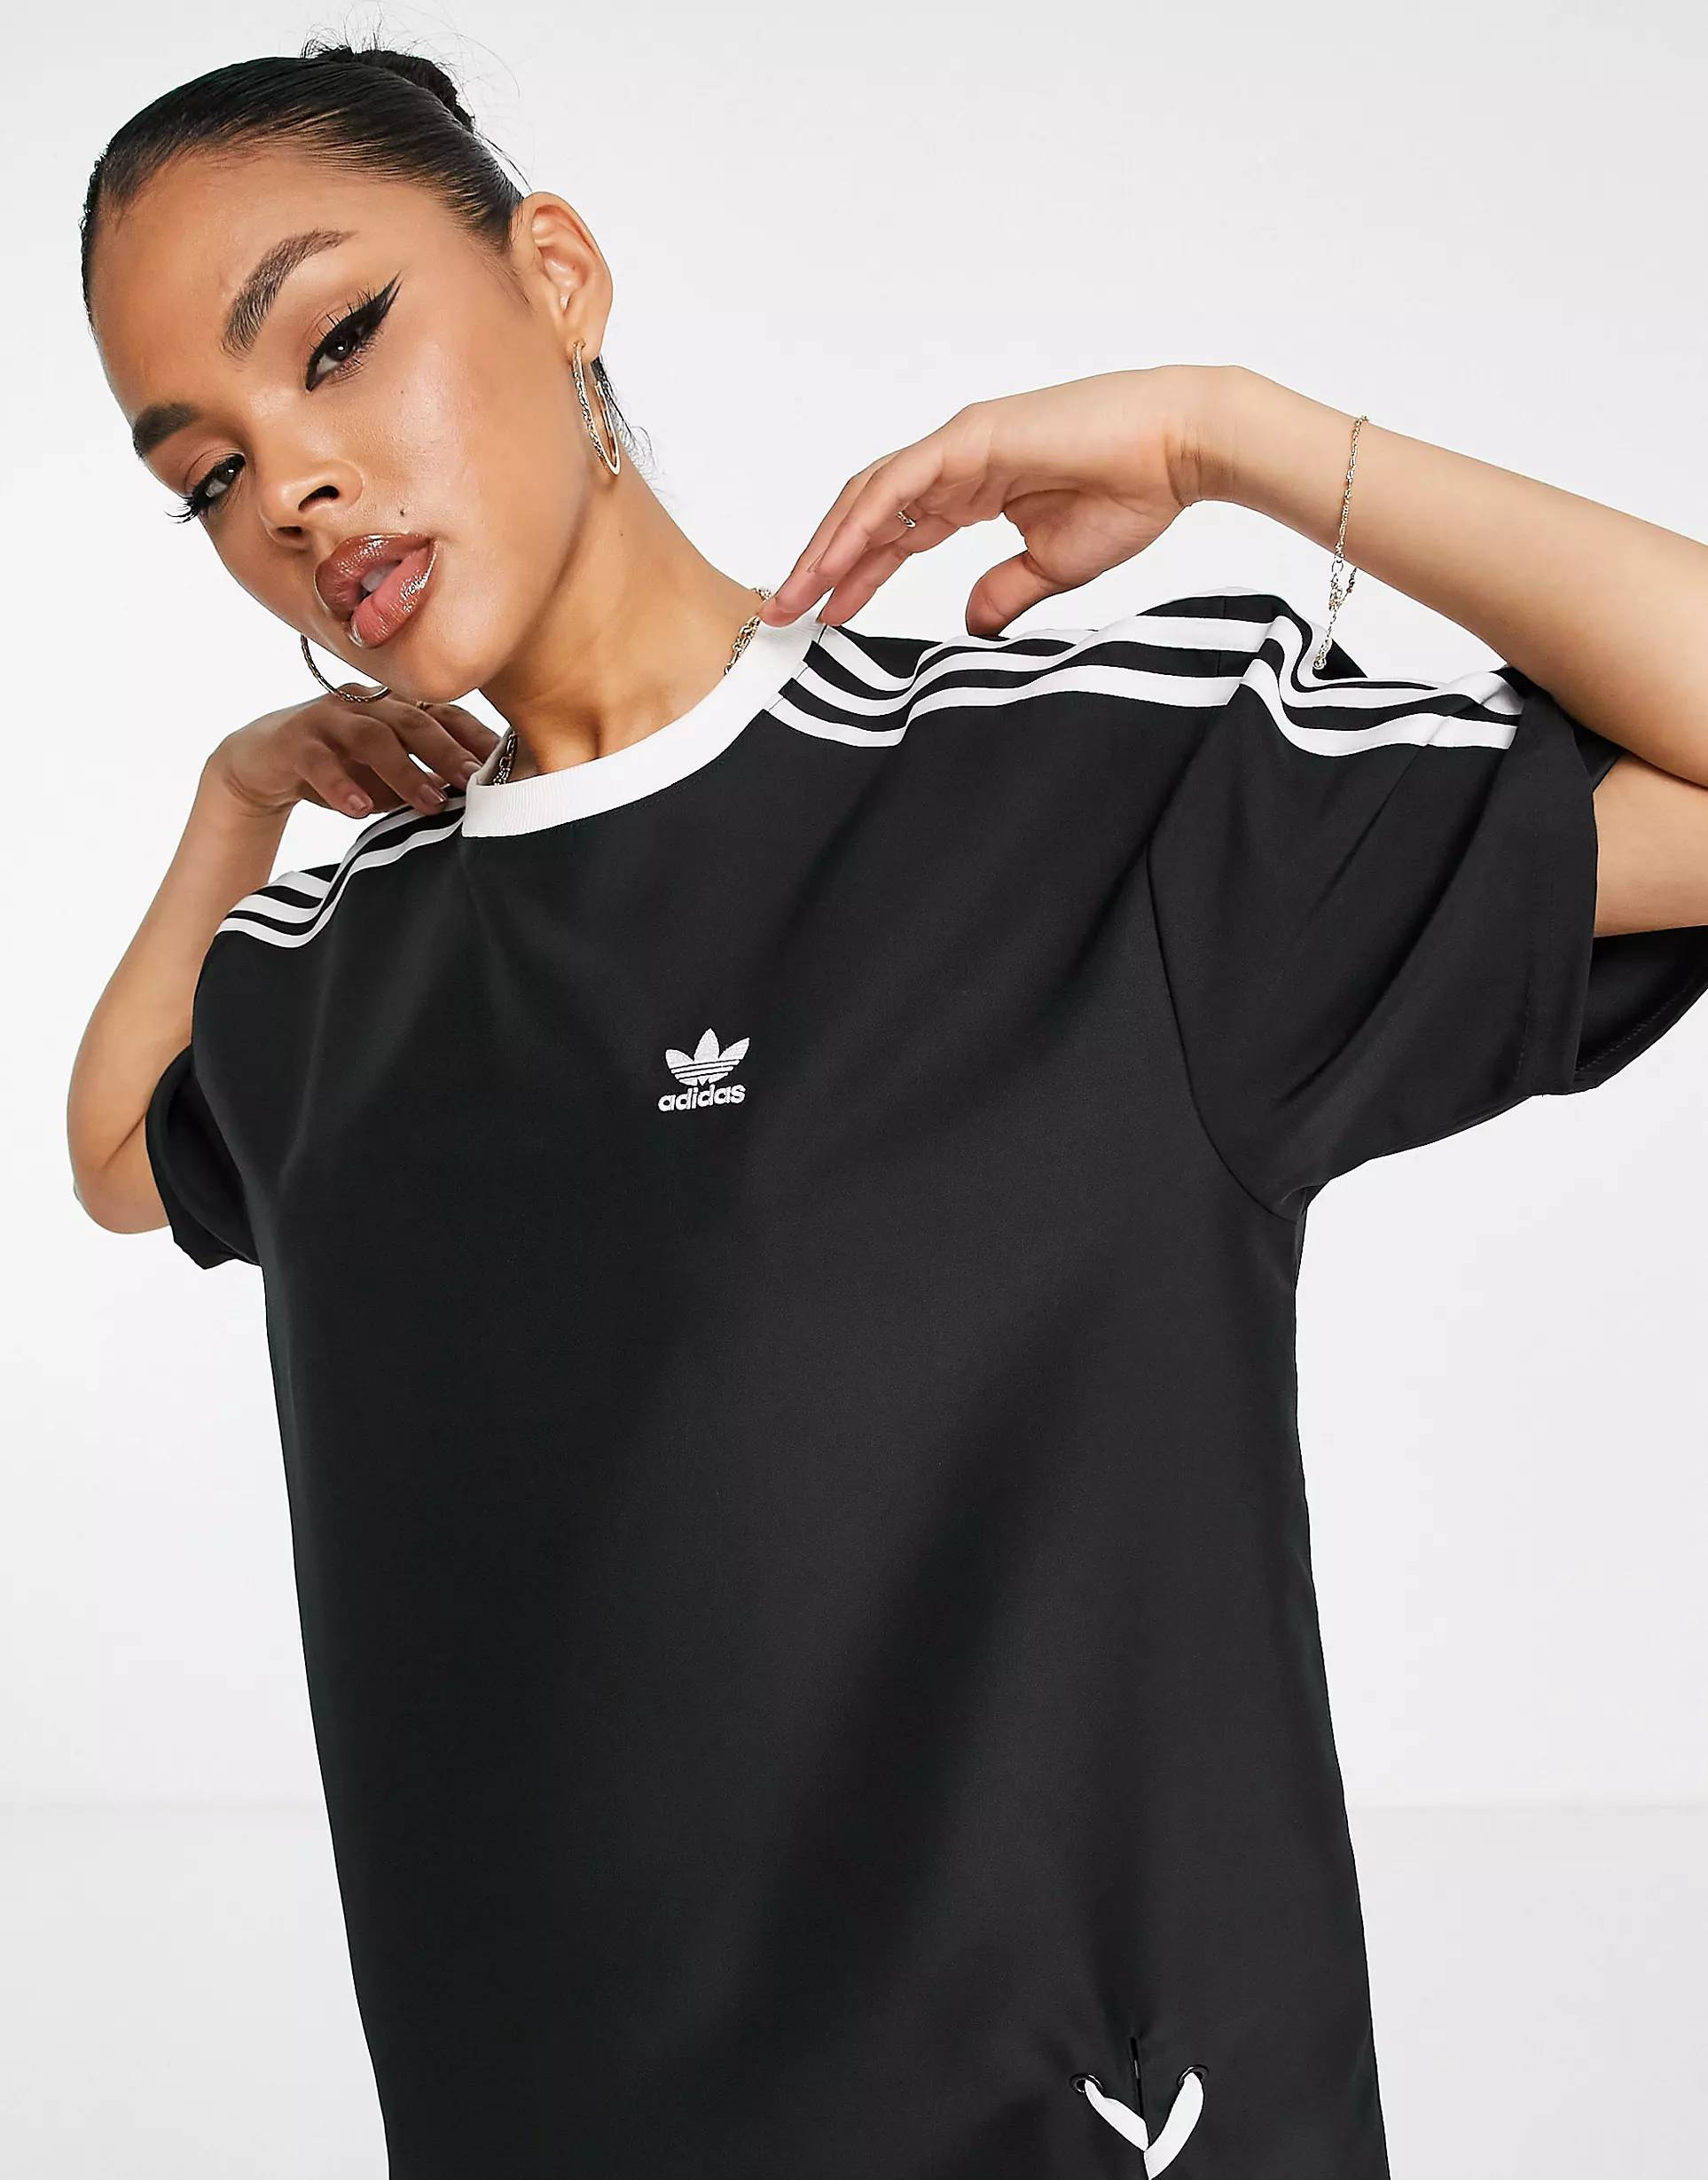 \'Always adidas | Supplier Original\' Buy The Where Sole Dress T-Shirt To |